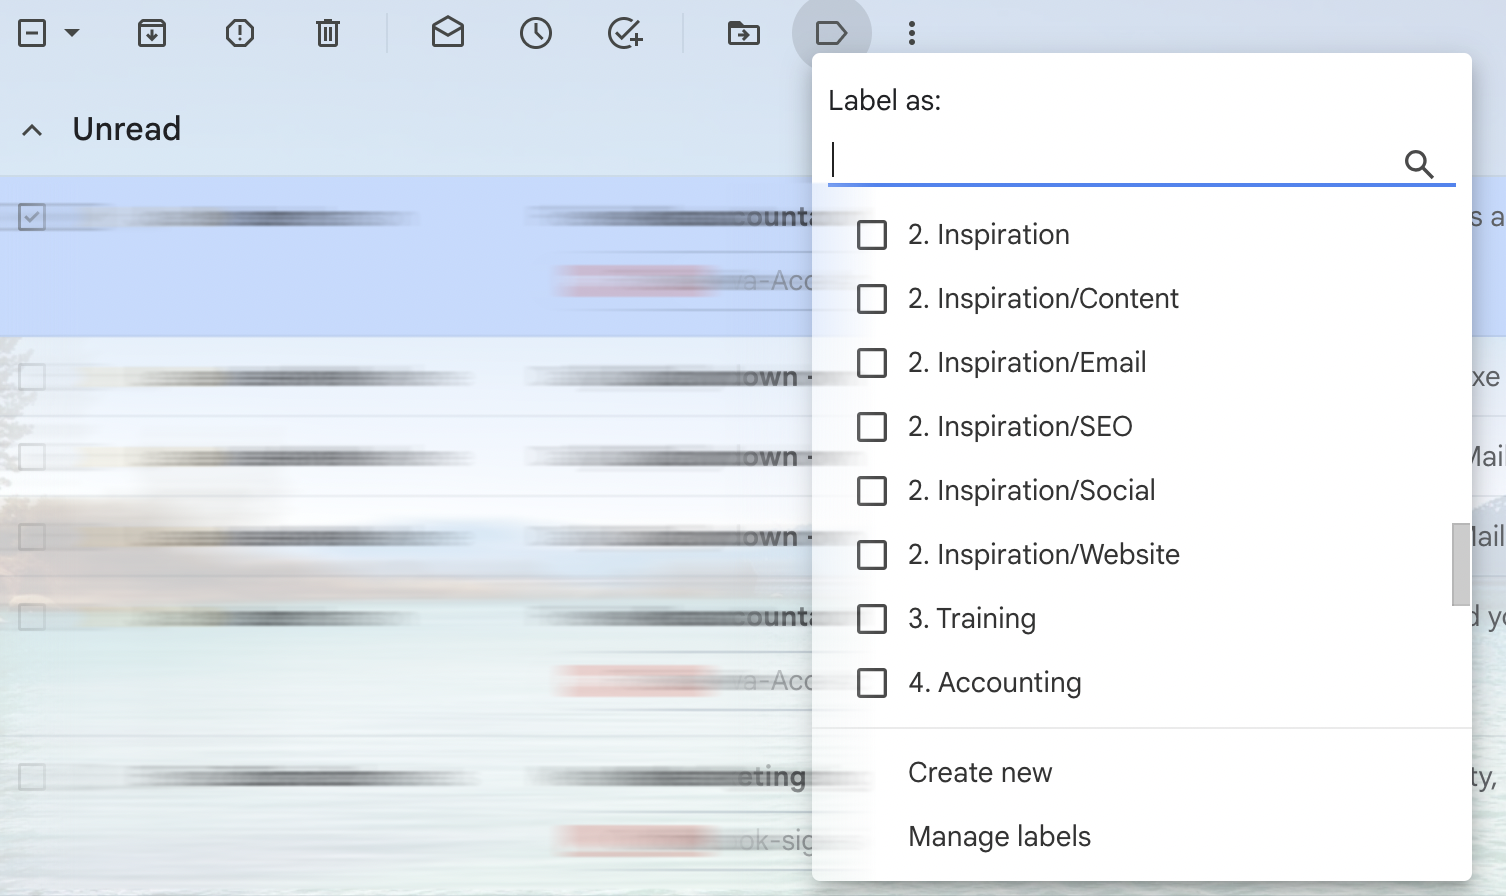 How to Organize Emails in Gmail